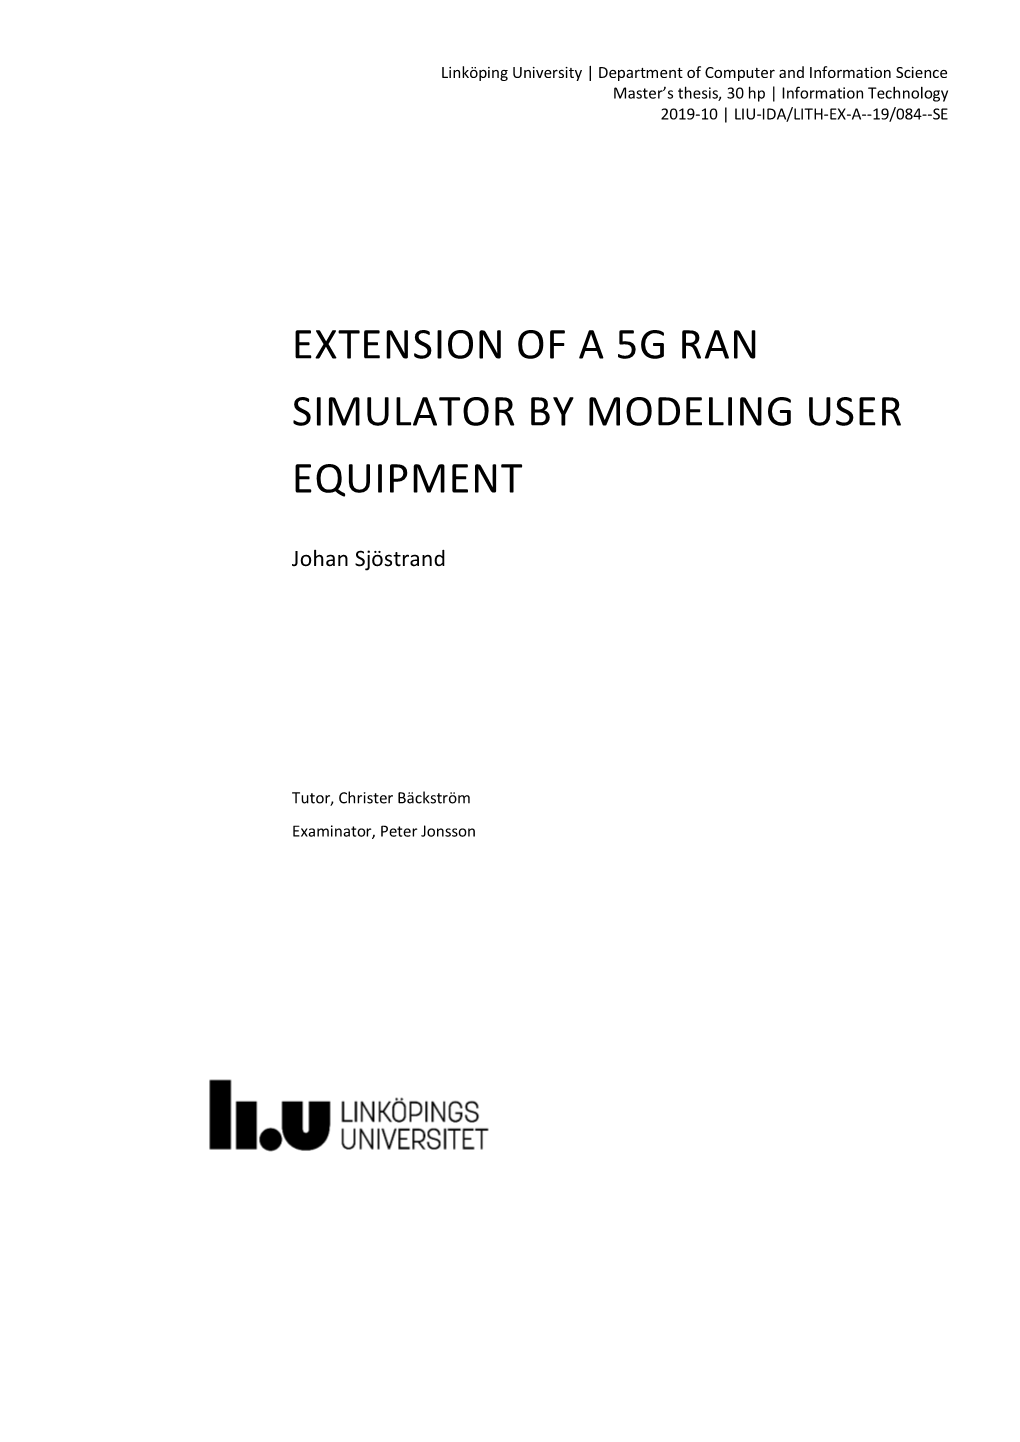 Extension of a 5G Ran Simulator by Modeling User